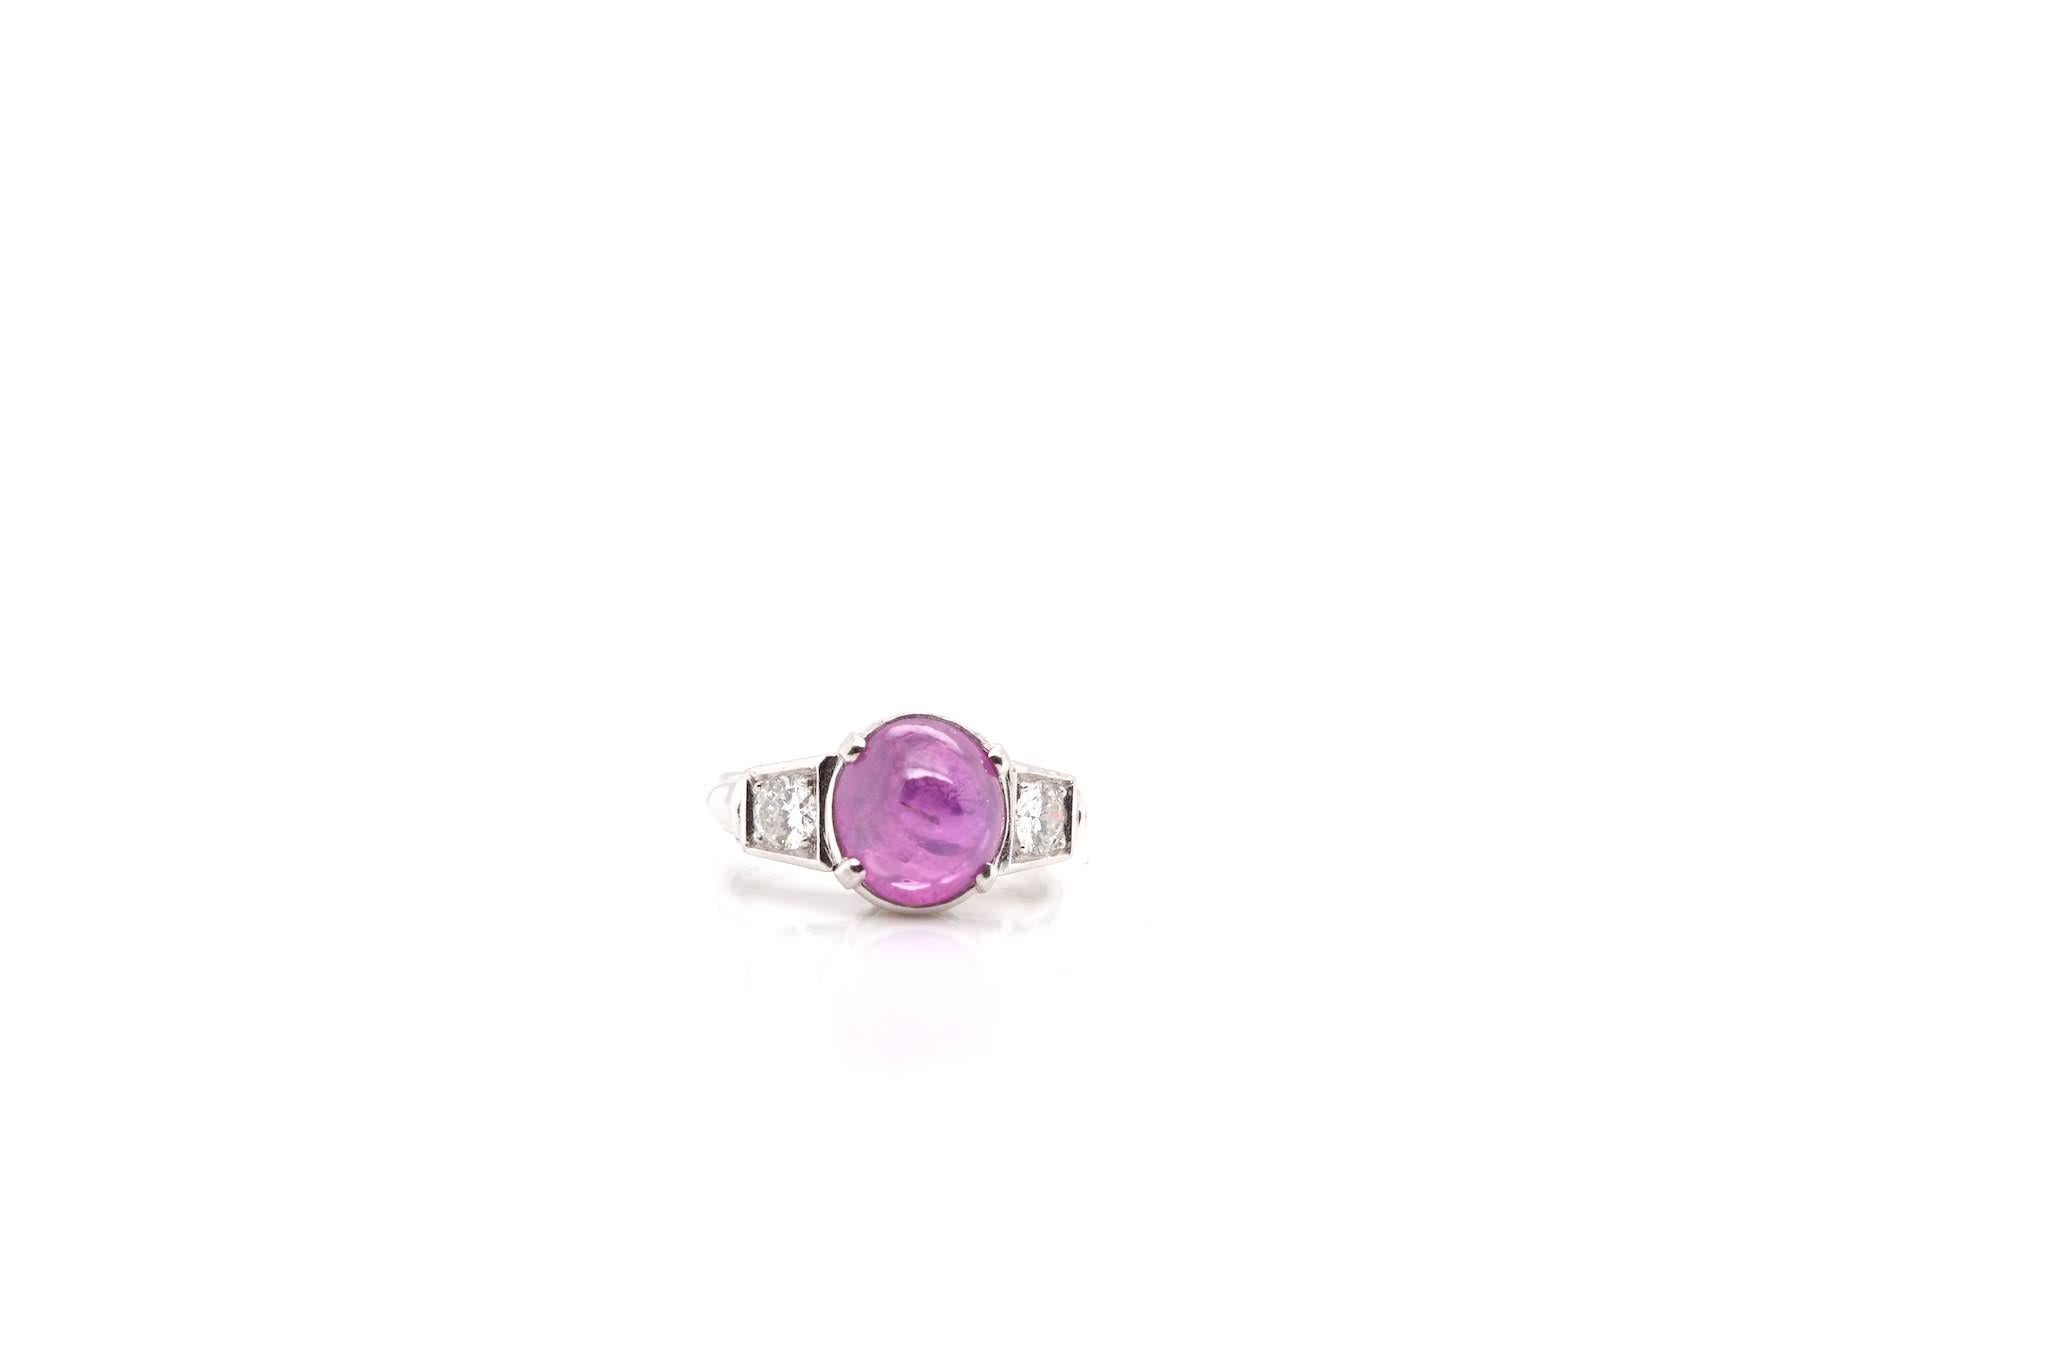 Stones: Star Ceylon pink sapphire and diamonds
brilliant cuts for a total weight of 0.40 carat
Material: Platinum
Dimensions: 10×10 mm
Period: 1930
Weight: 7.1g
Size: 50.5 (free sizing)
-Laboratory certificate
Certificate
Ref. : 22508